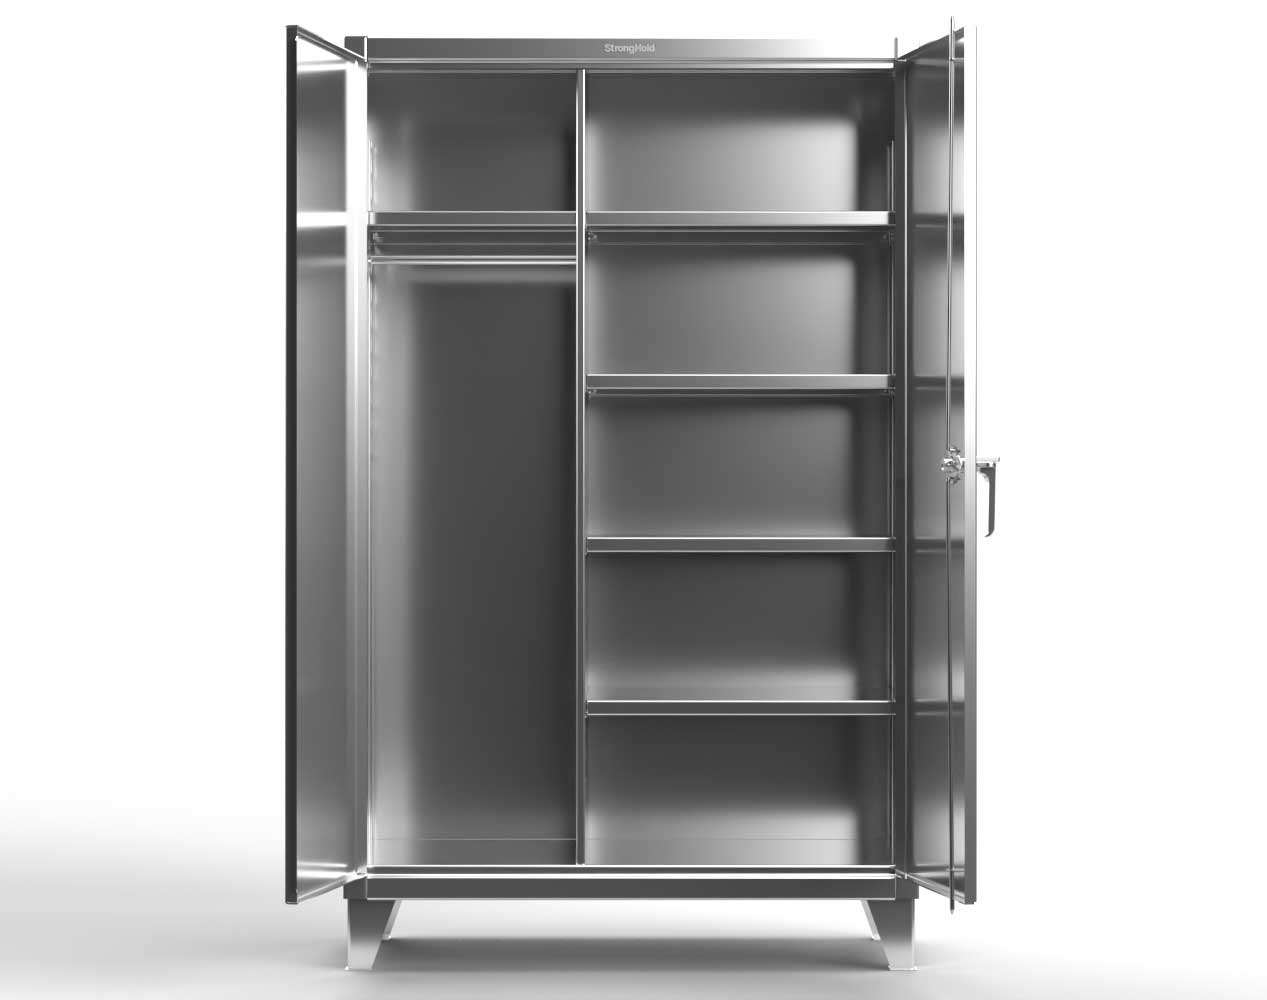 Extreme Duty 12 GA Stainless Steel Uniform Cabinet with 5 Shelves - 60 In. W x 24 In. D x 78 In. H